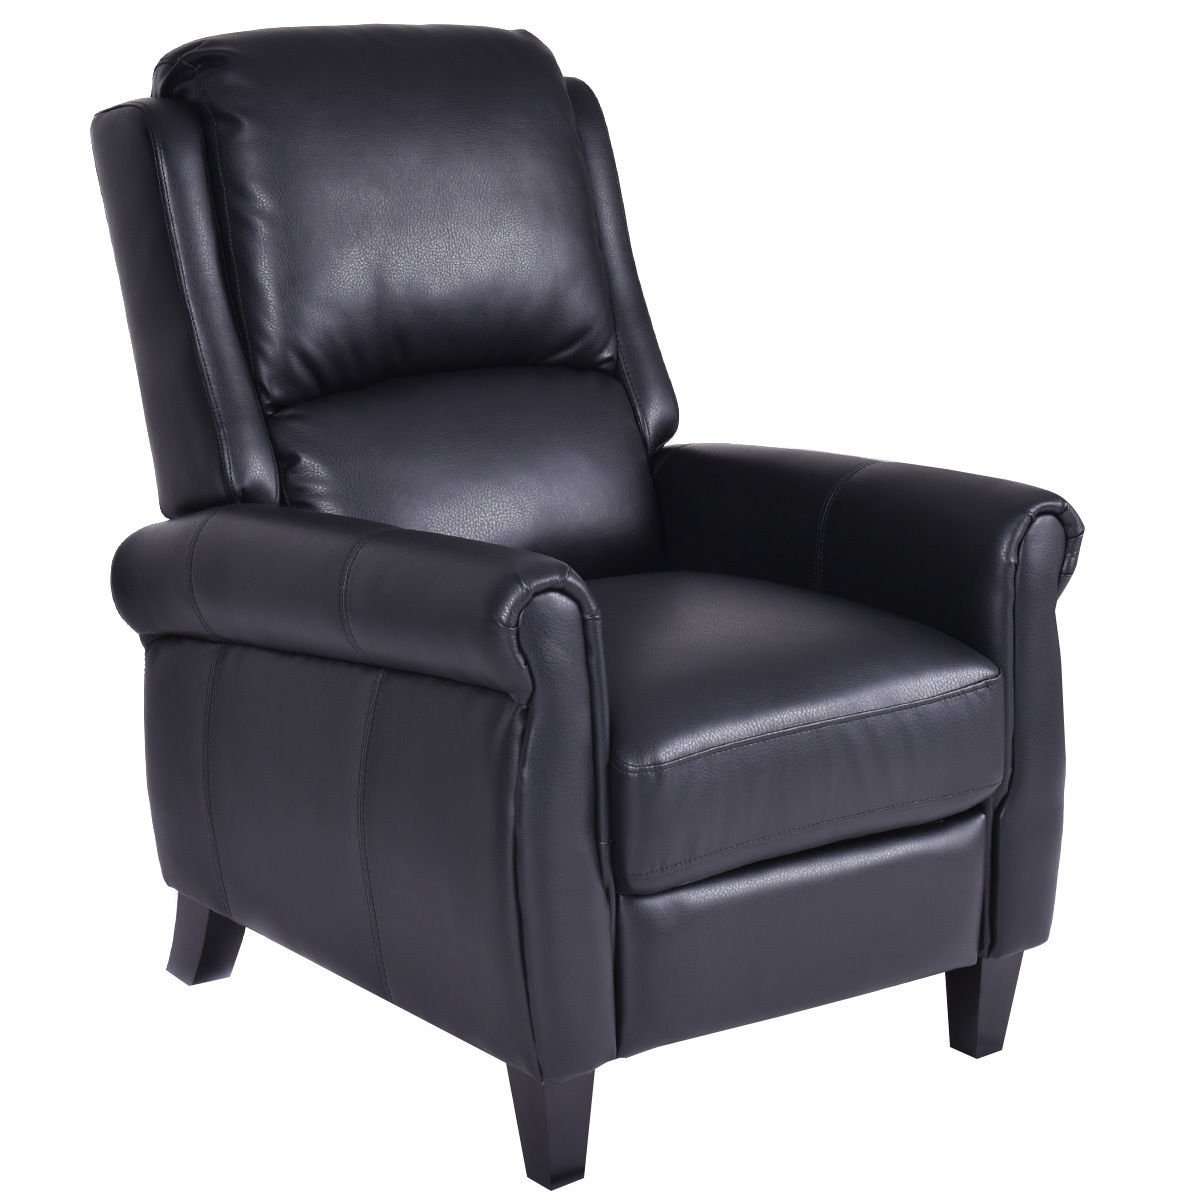 Giantex PU Leather Recliner Chair Push Back Club Living Room Seat Furniture w/Footrest (Black)